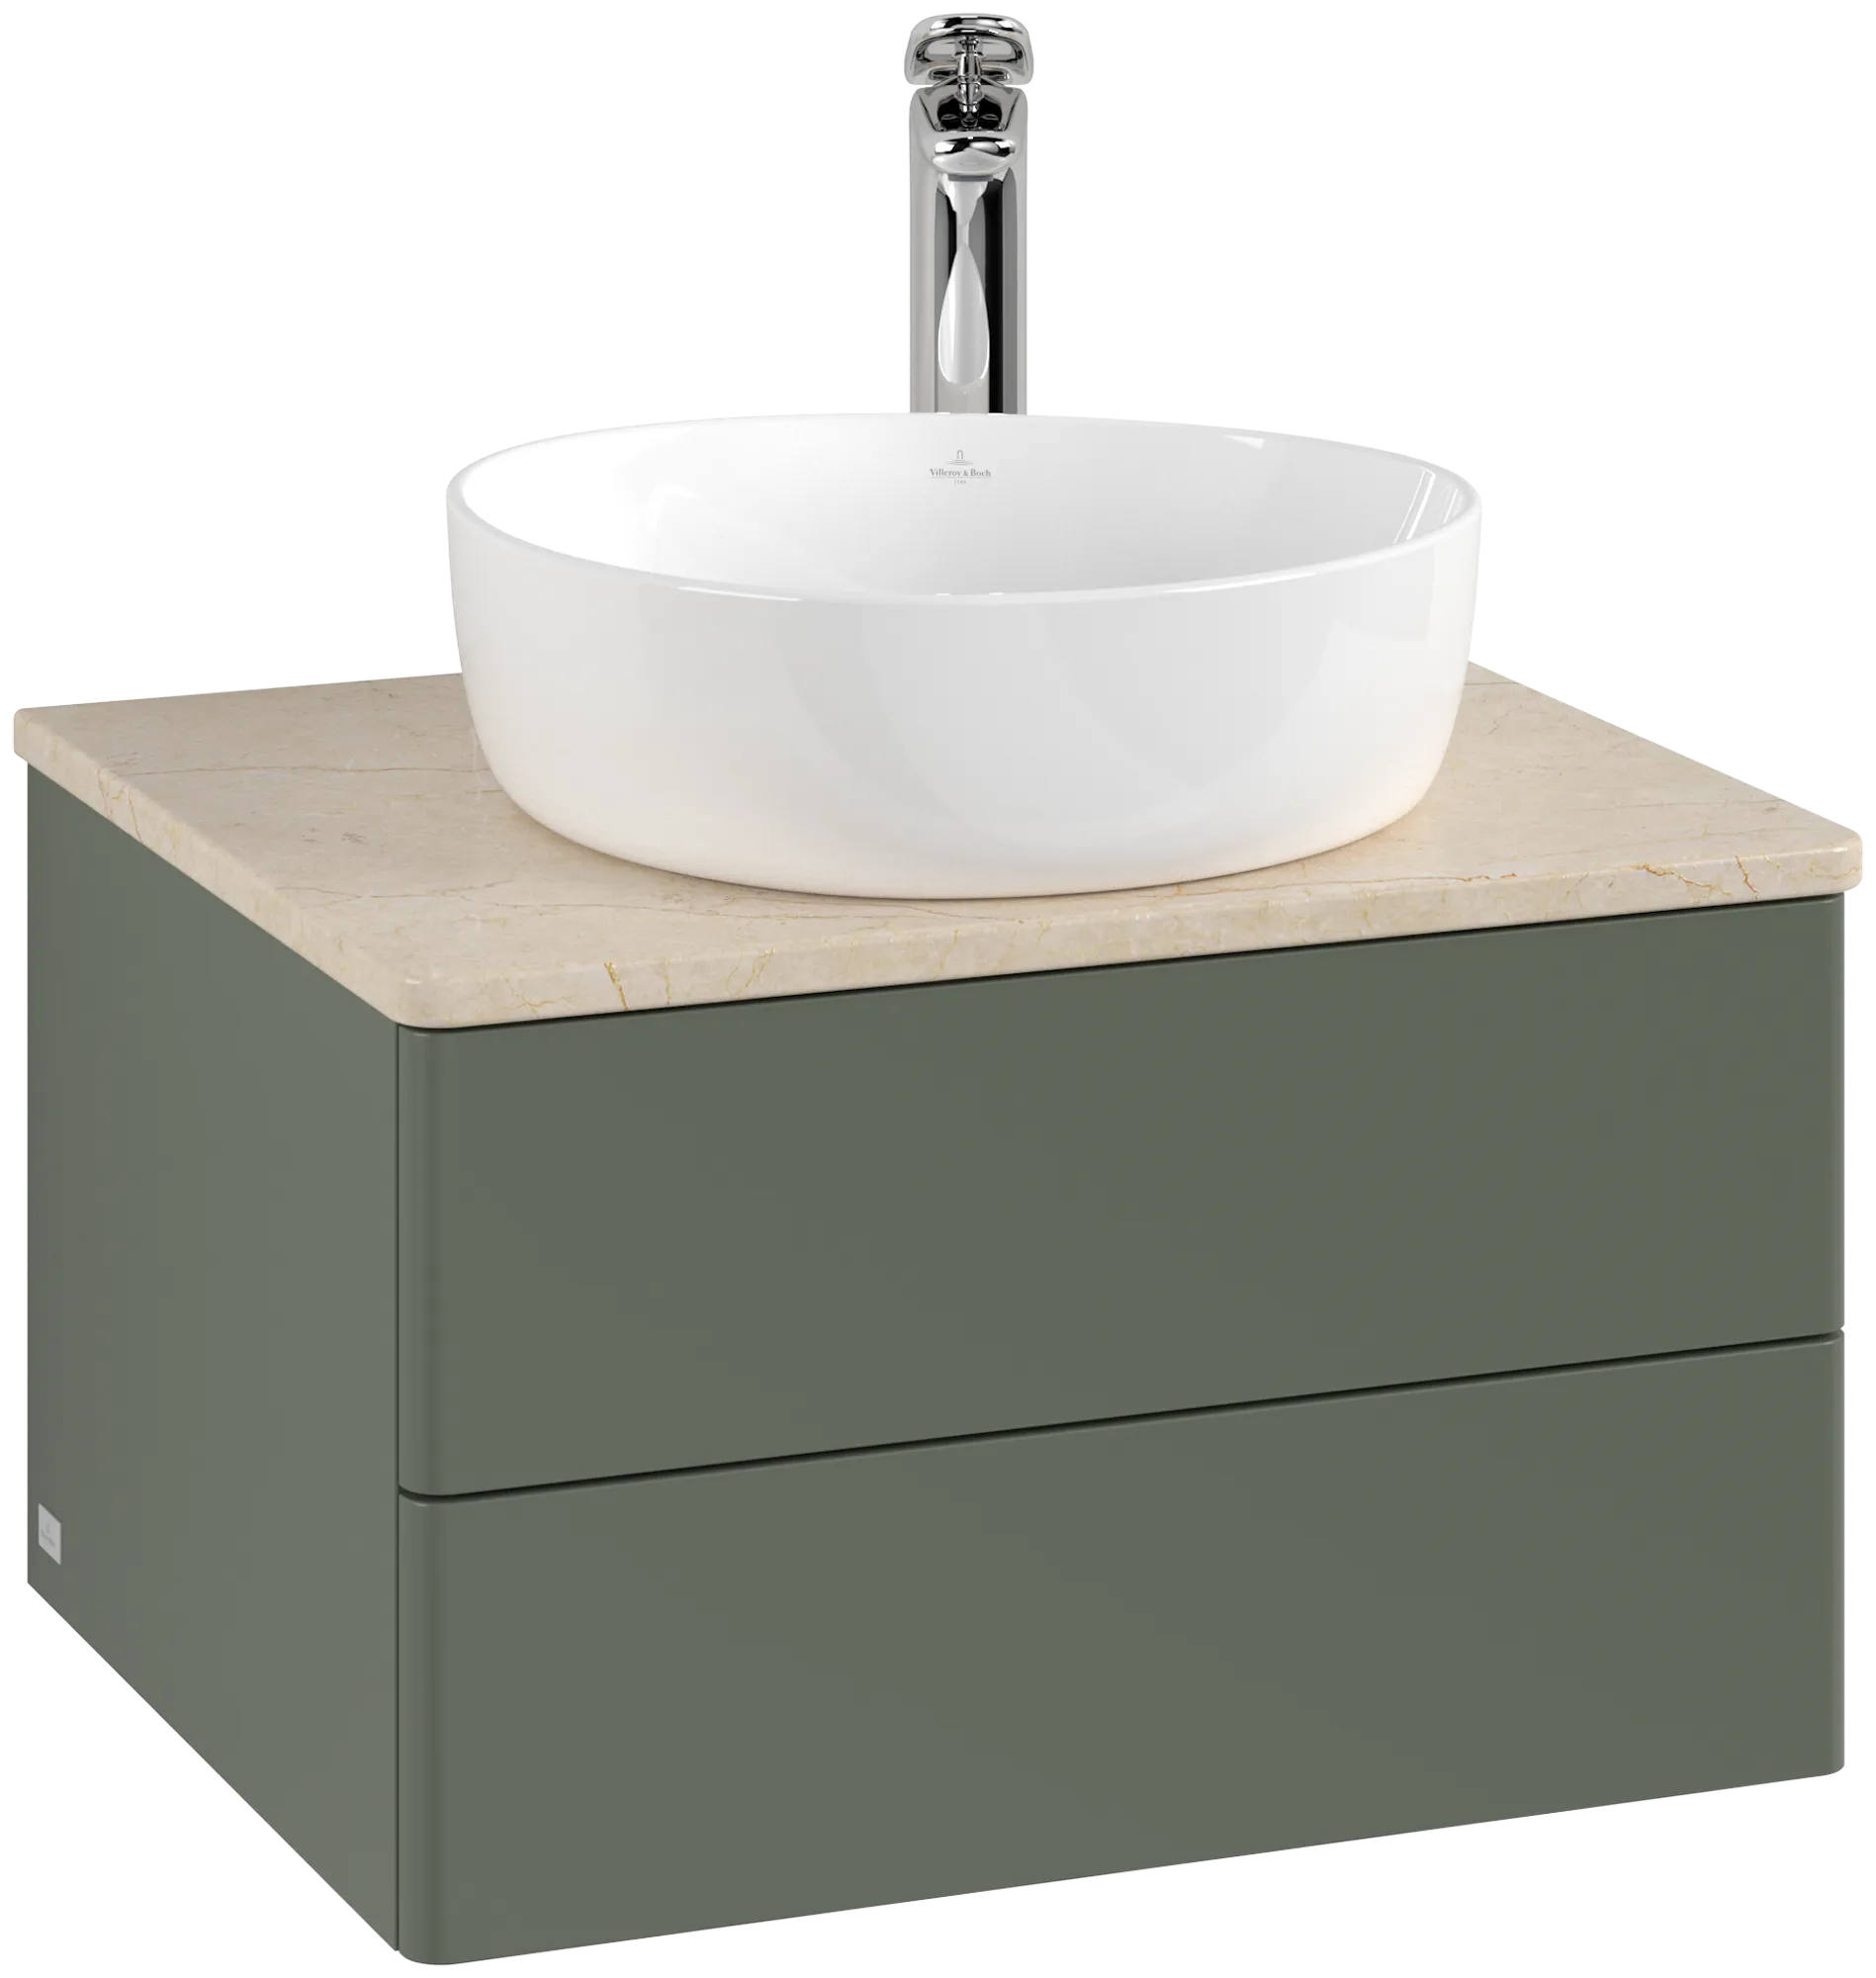 Picture of VILLEROY BOCH Antao Vanity unit, with lighting, 2 pull-out compartments, 600 x 360 x 500 mm, Front without structure, Leaf Green Matt Lacquer / Botticino #L18053HL